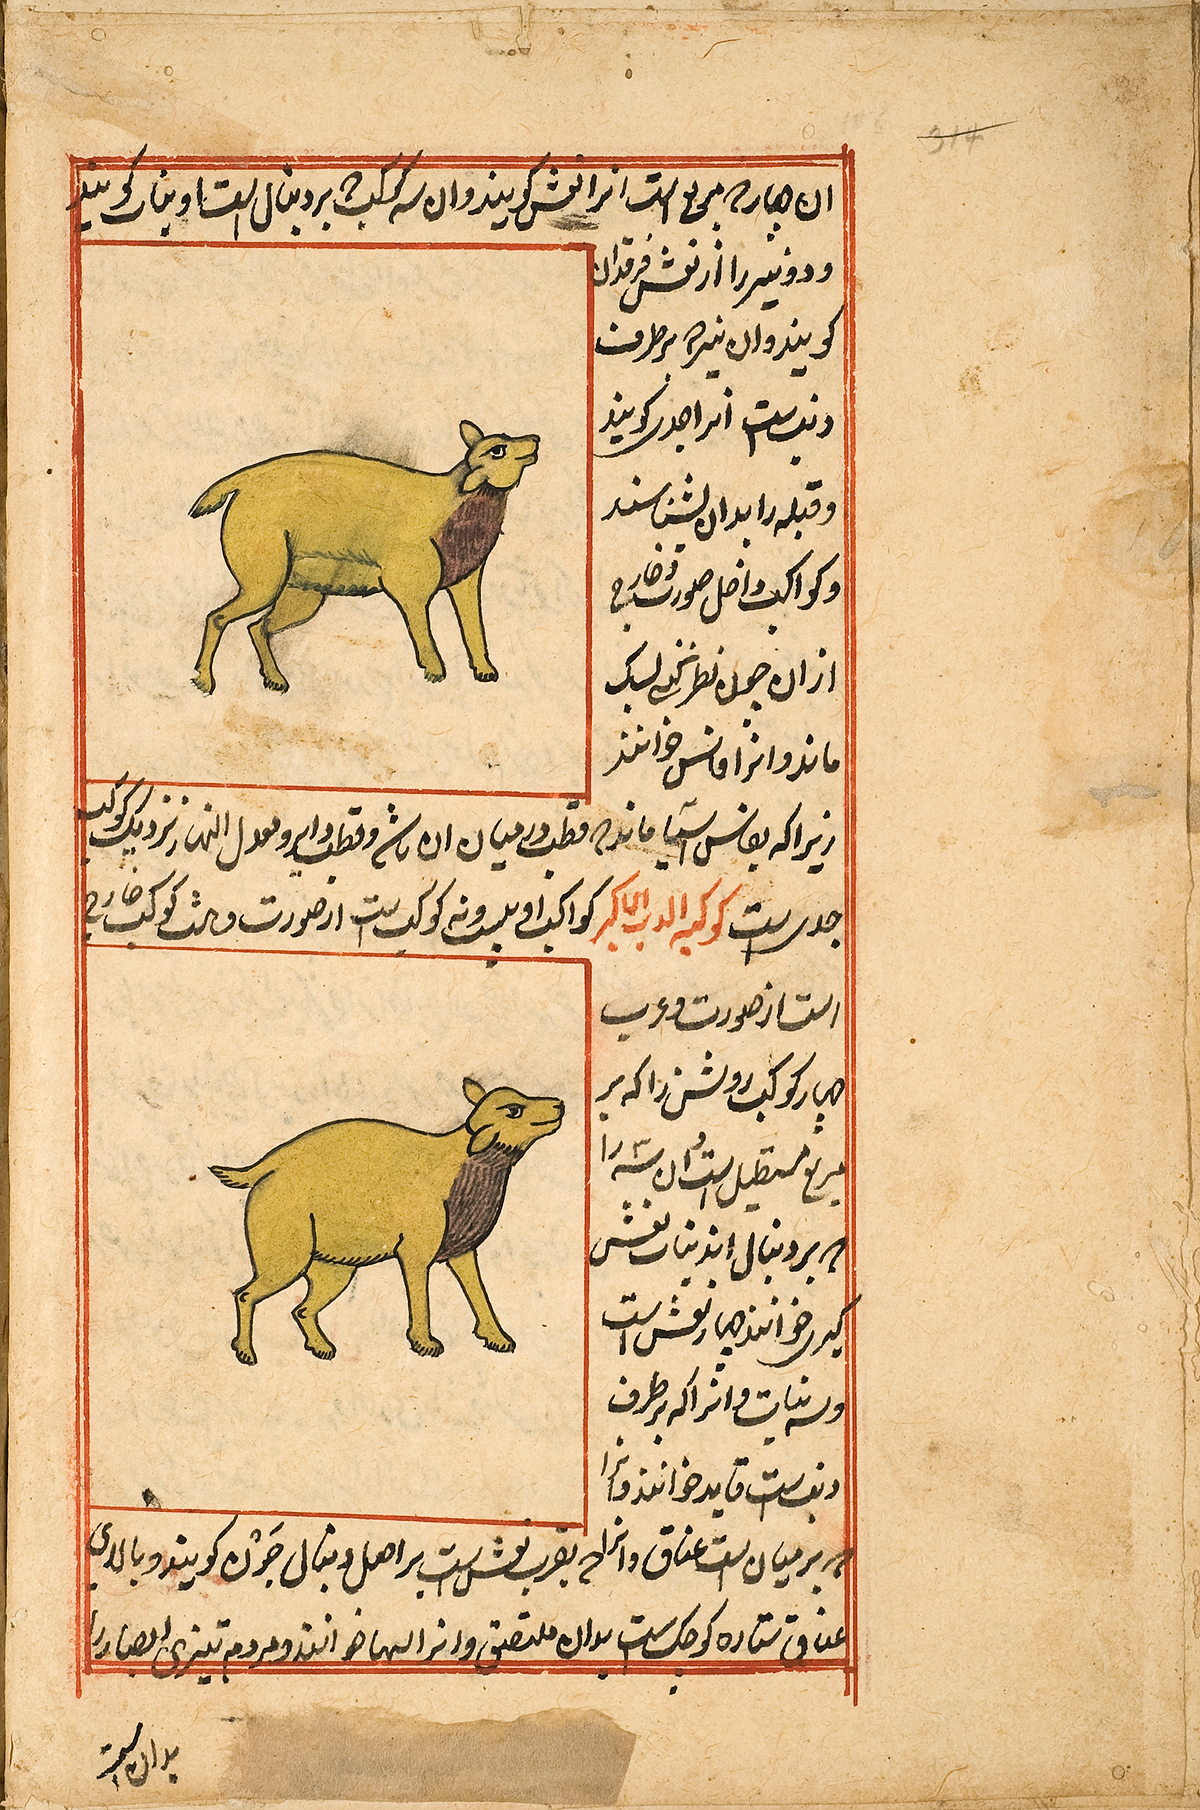 The constellations Ursa Major and Ursa Minor, or the Big Dipper and the Little Dipper, represented as two yellow bears on all fours, almost resembling deer, surrounded by Persian text and a red double ruled border.